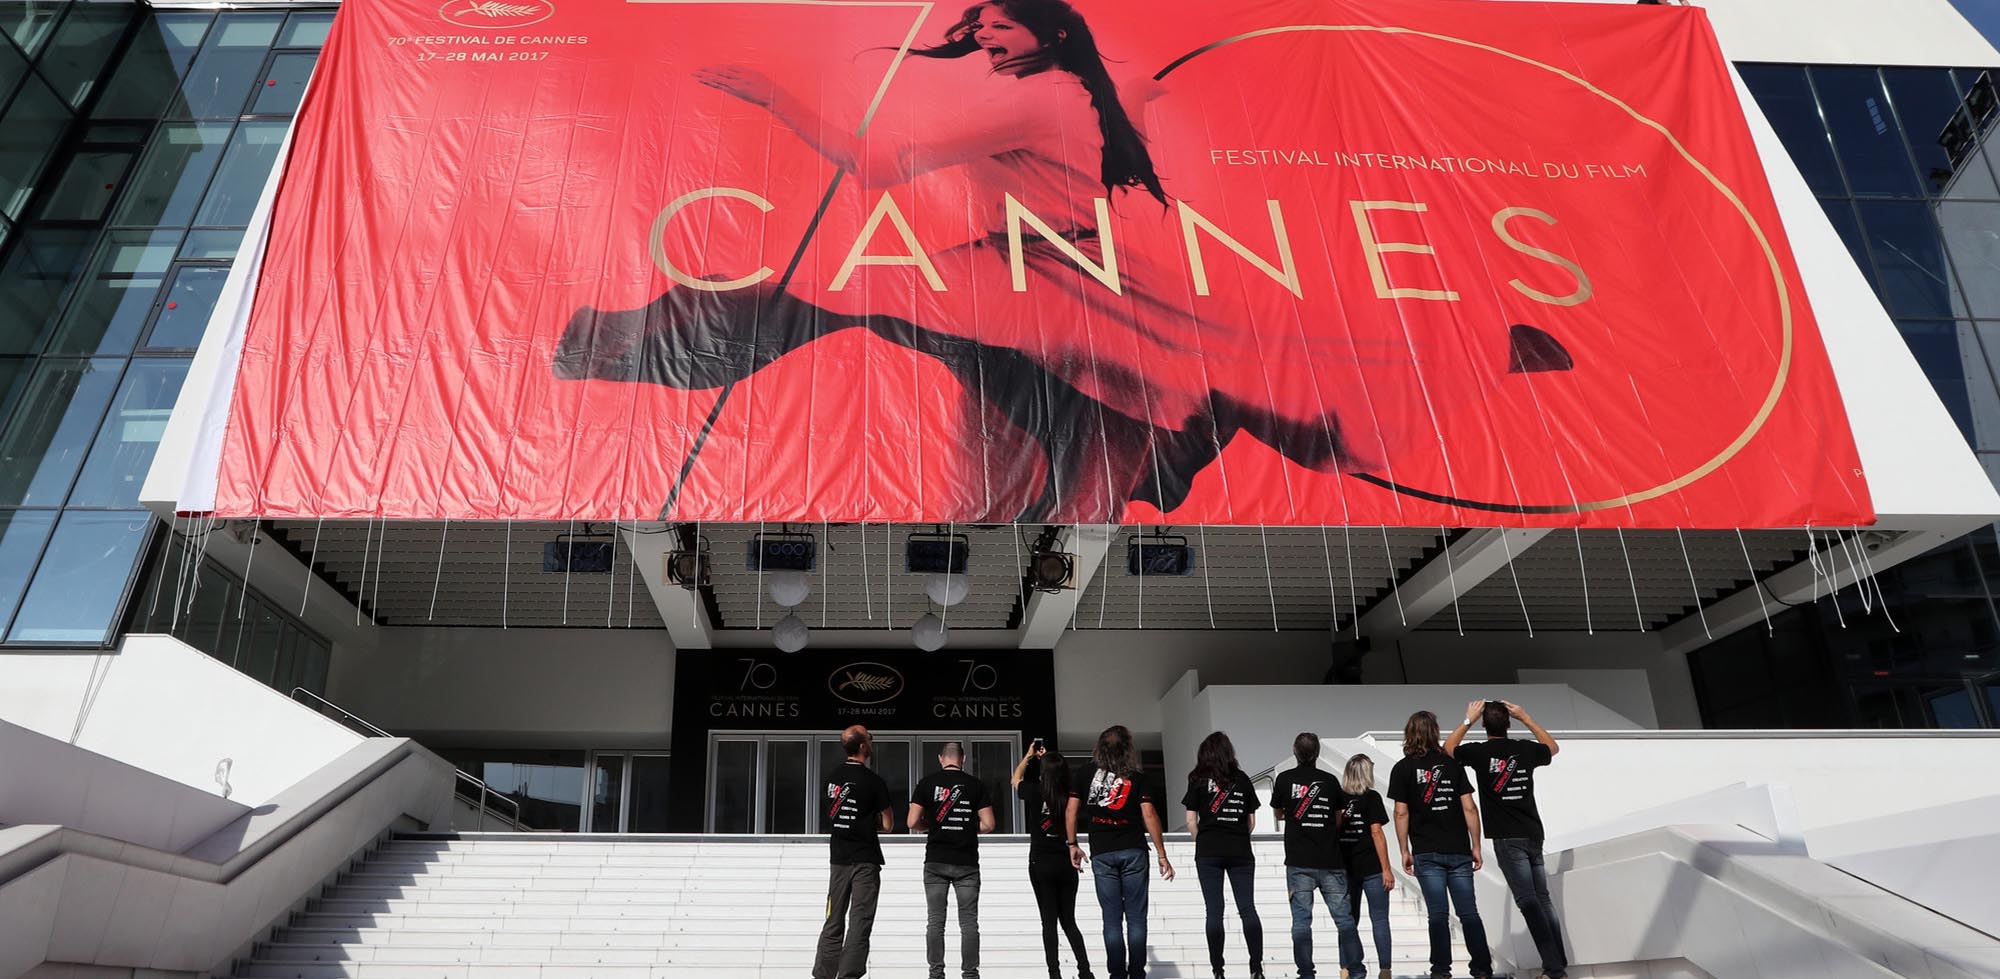 Better get those bunion pads out, ladies, because the 71st Cannes Film Festival is upon us. After adding more draconian layers to its already outdated rules, in recent weeks the festival decided to ban press screenings, selfies, and Netflix from competition.